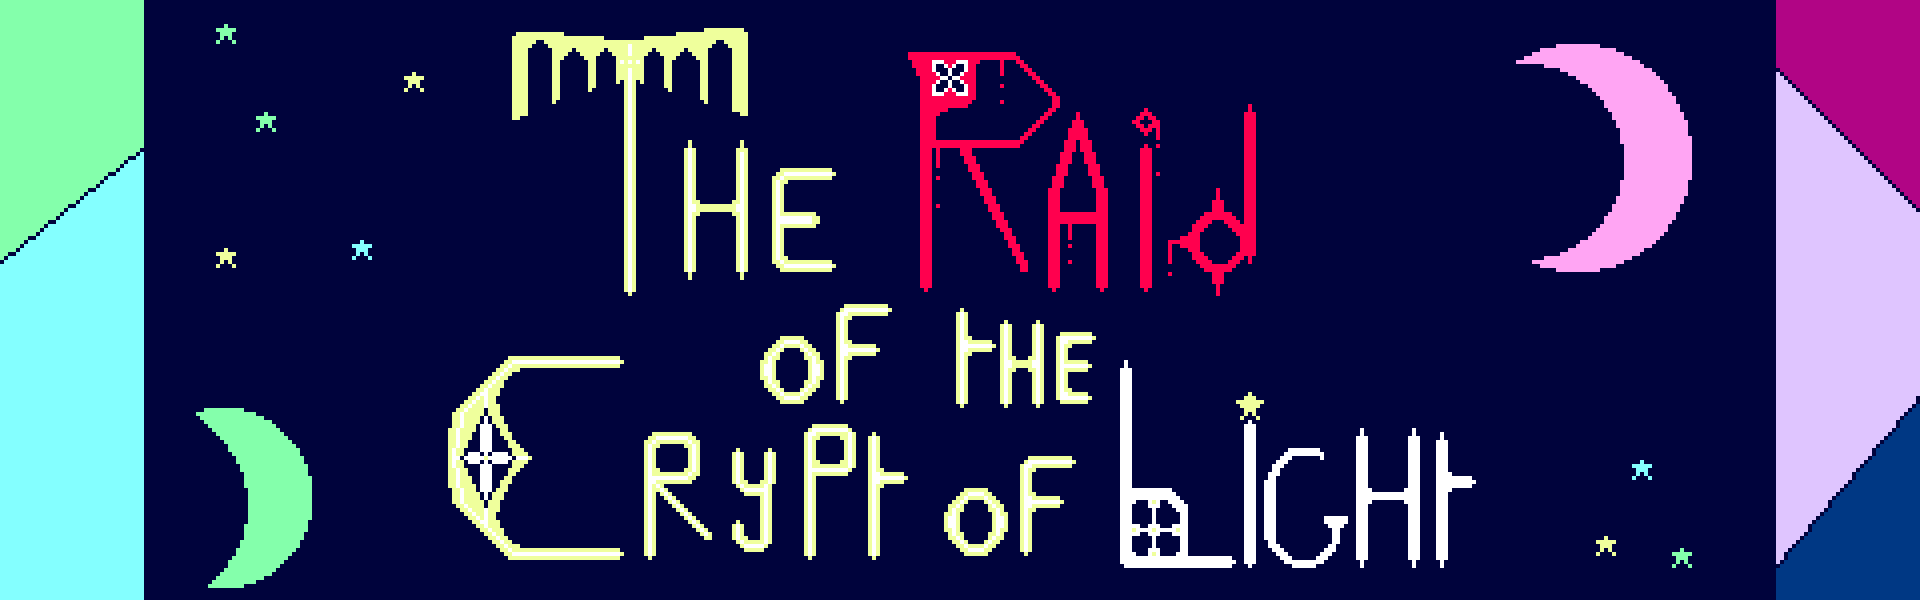 The Raid Of The Crypt Of Light